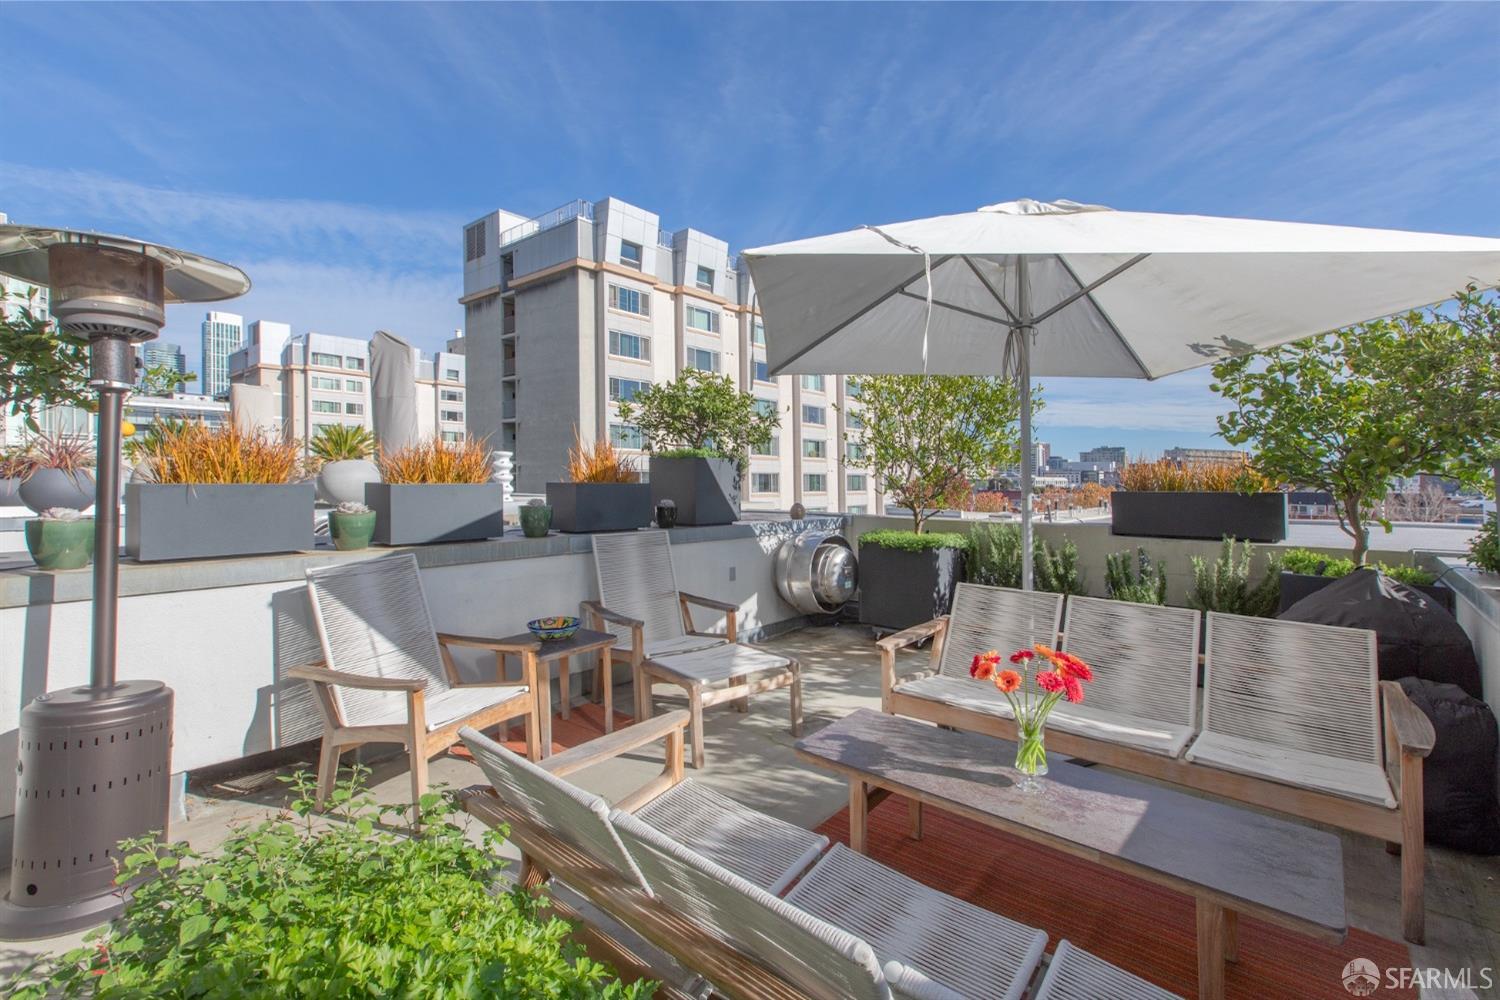 Condos, Lofts and Townhomes for Sale in San Francisco Lofts